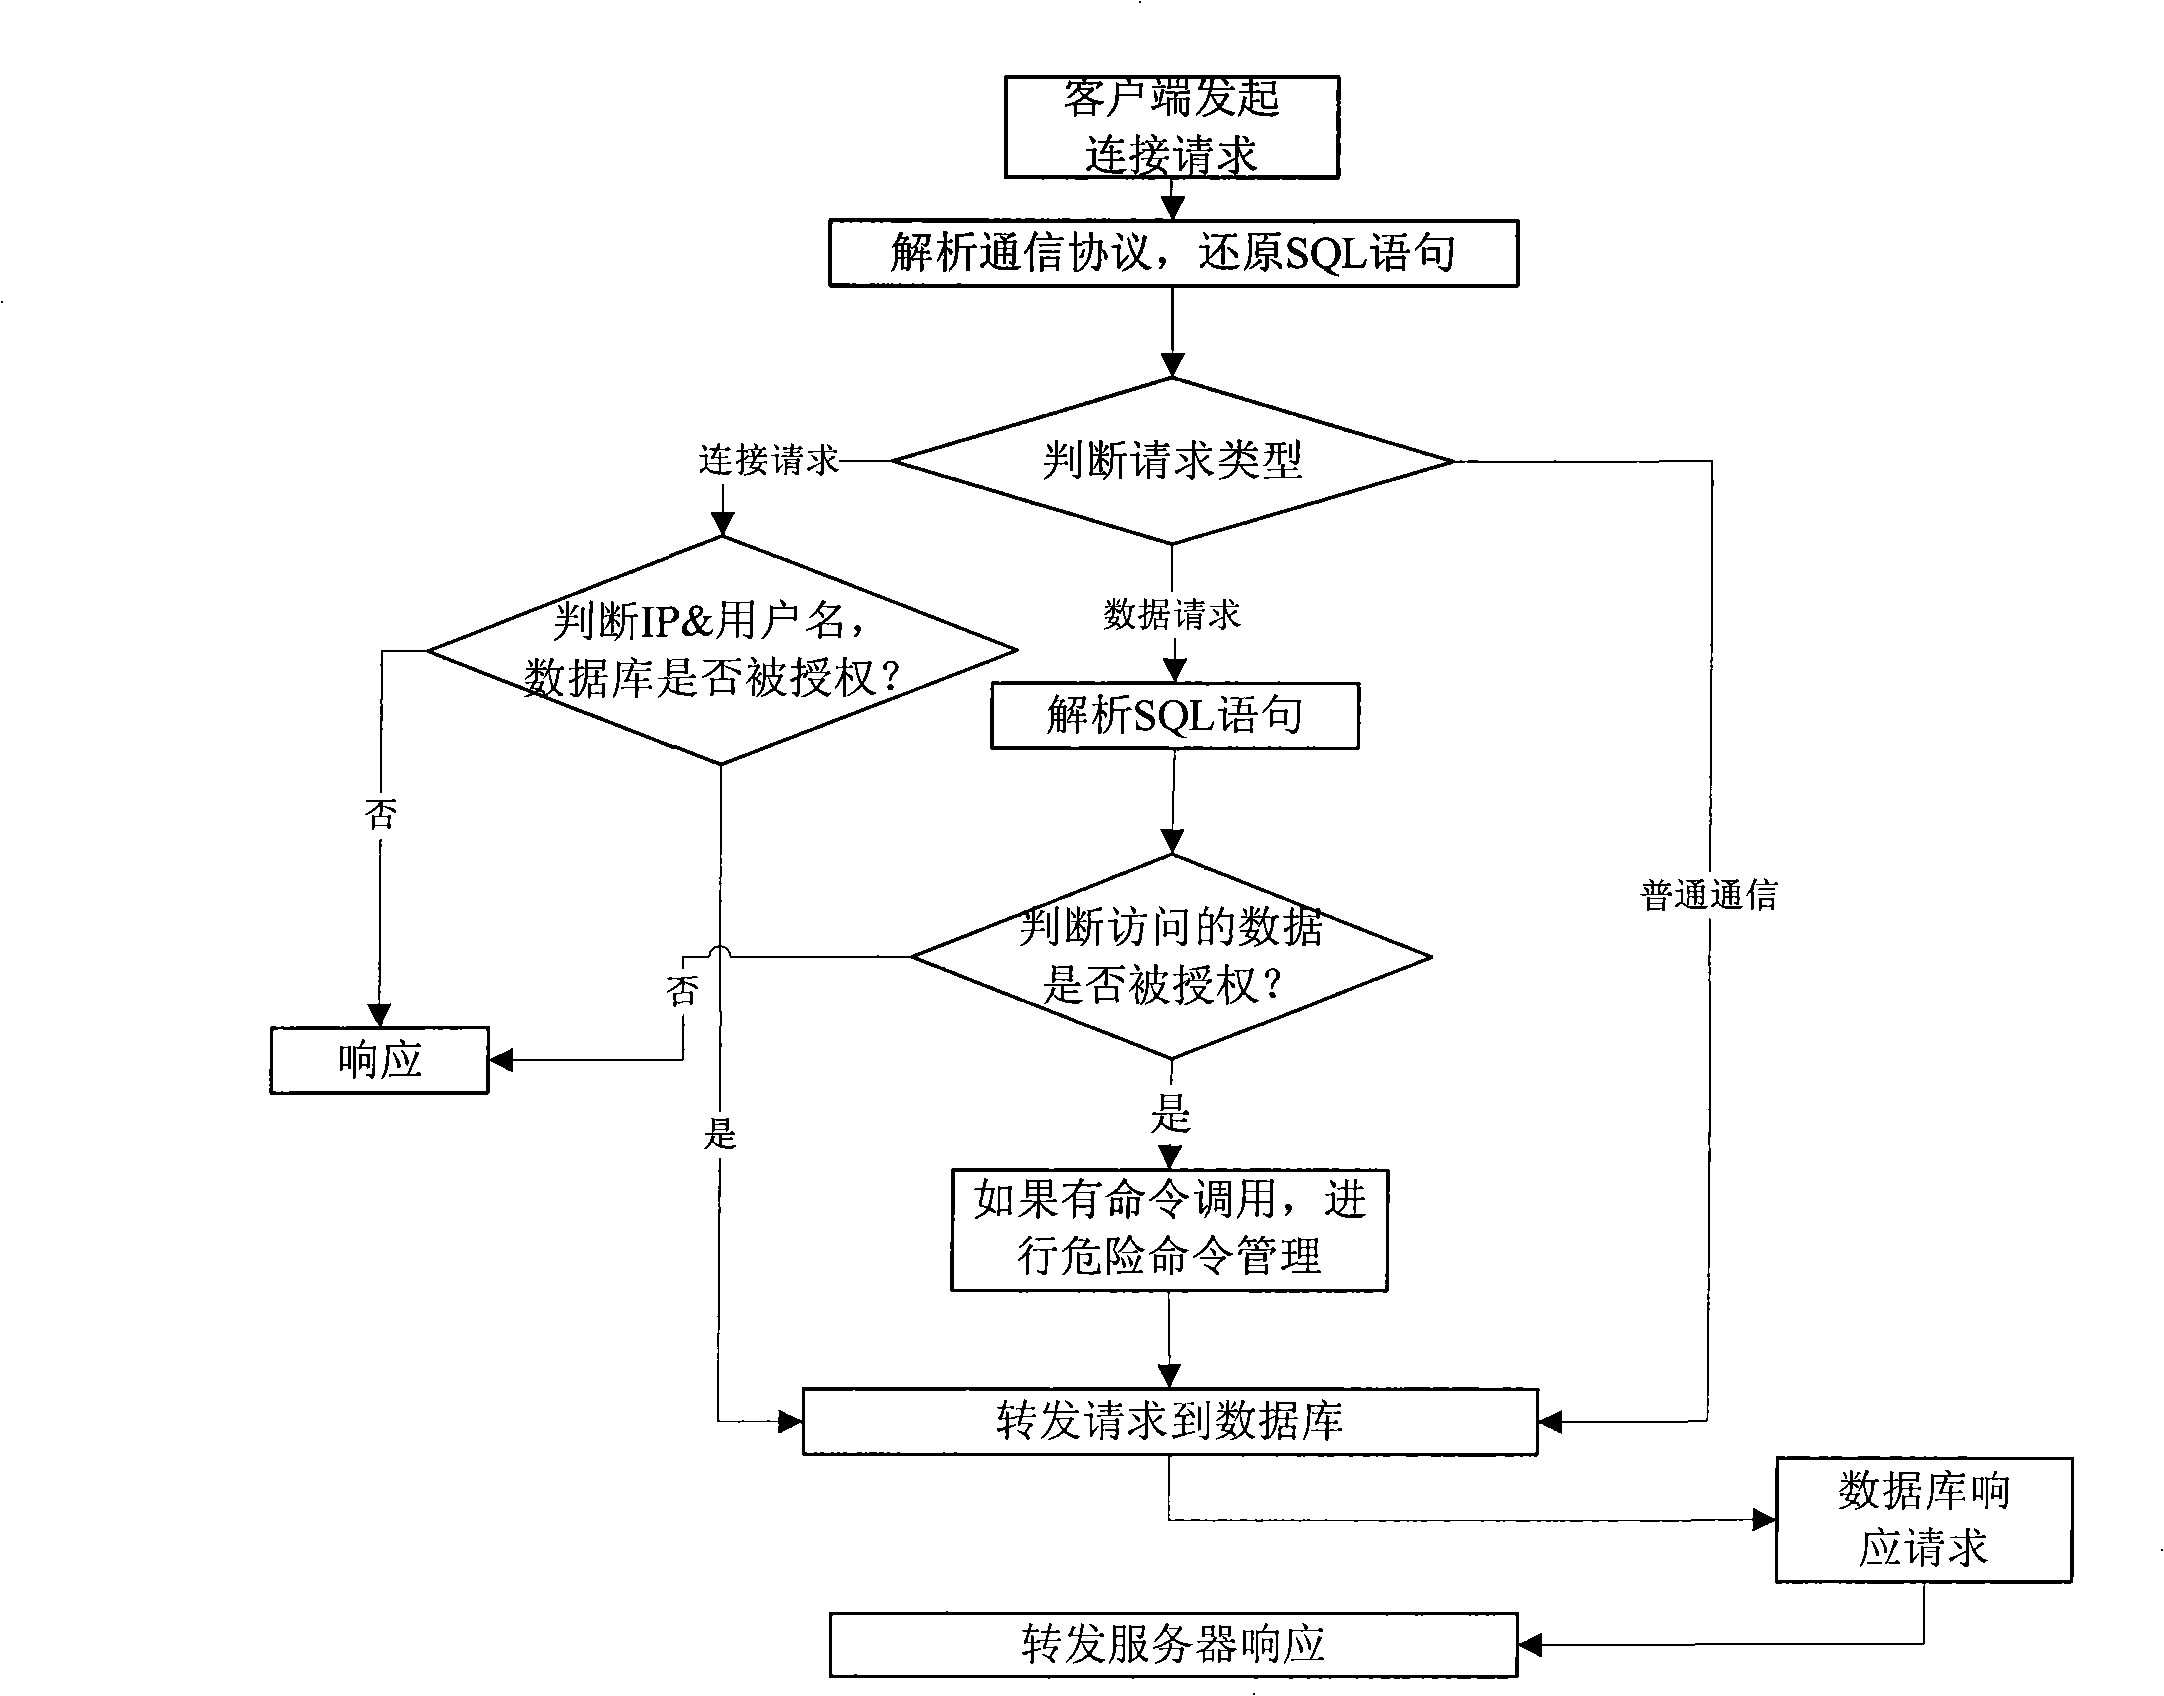 Method for enhancing the database security based on agent way